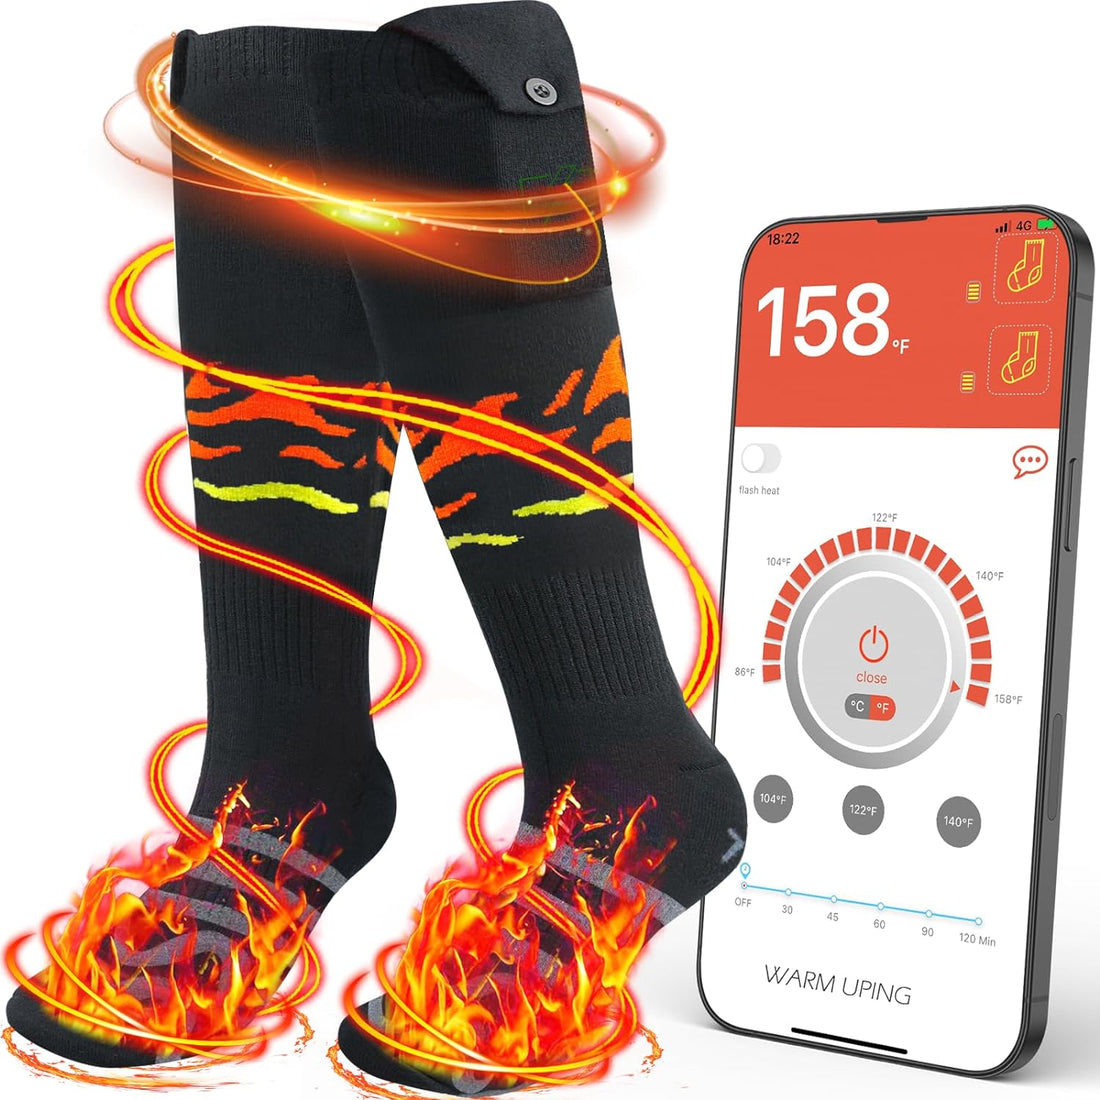 Heated Socks,Upgraded Rechargeable Electric Heated Socks,7.4V 2500mAh Battery Cold Weather Heat Socks for Men Women with APP Remote Control,Outdoor Camping Hiking Skiing Foot Warm Winter Socks - M